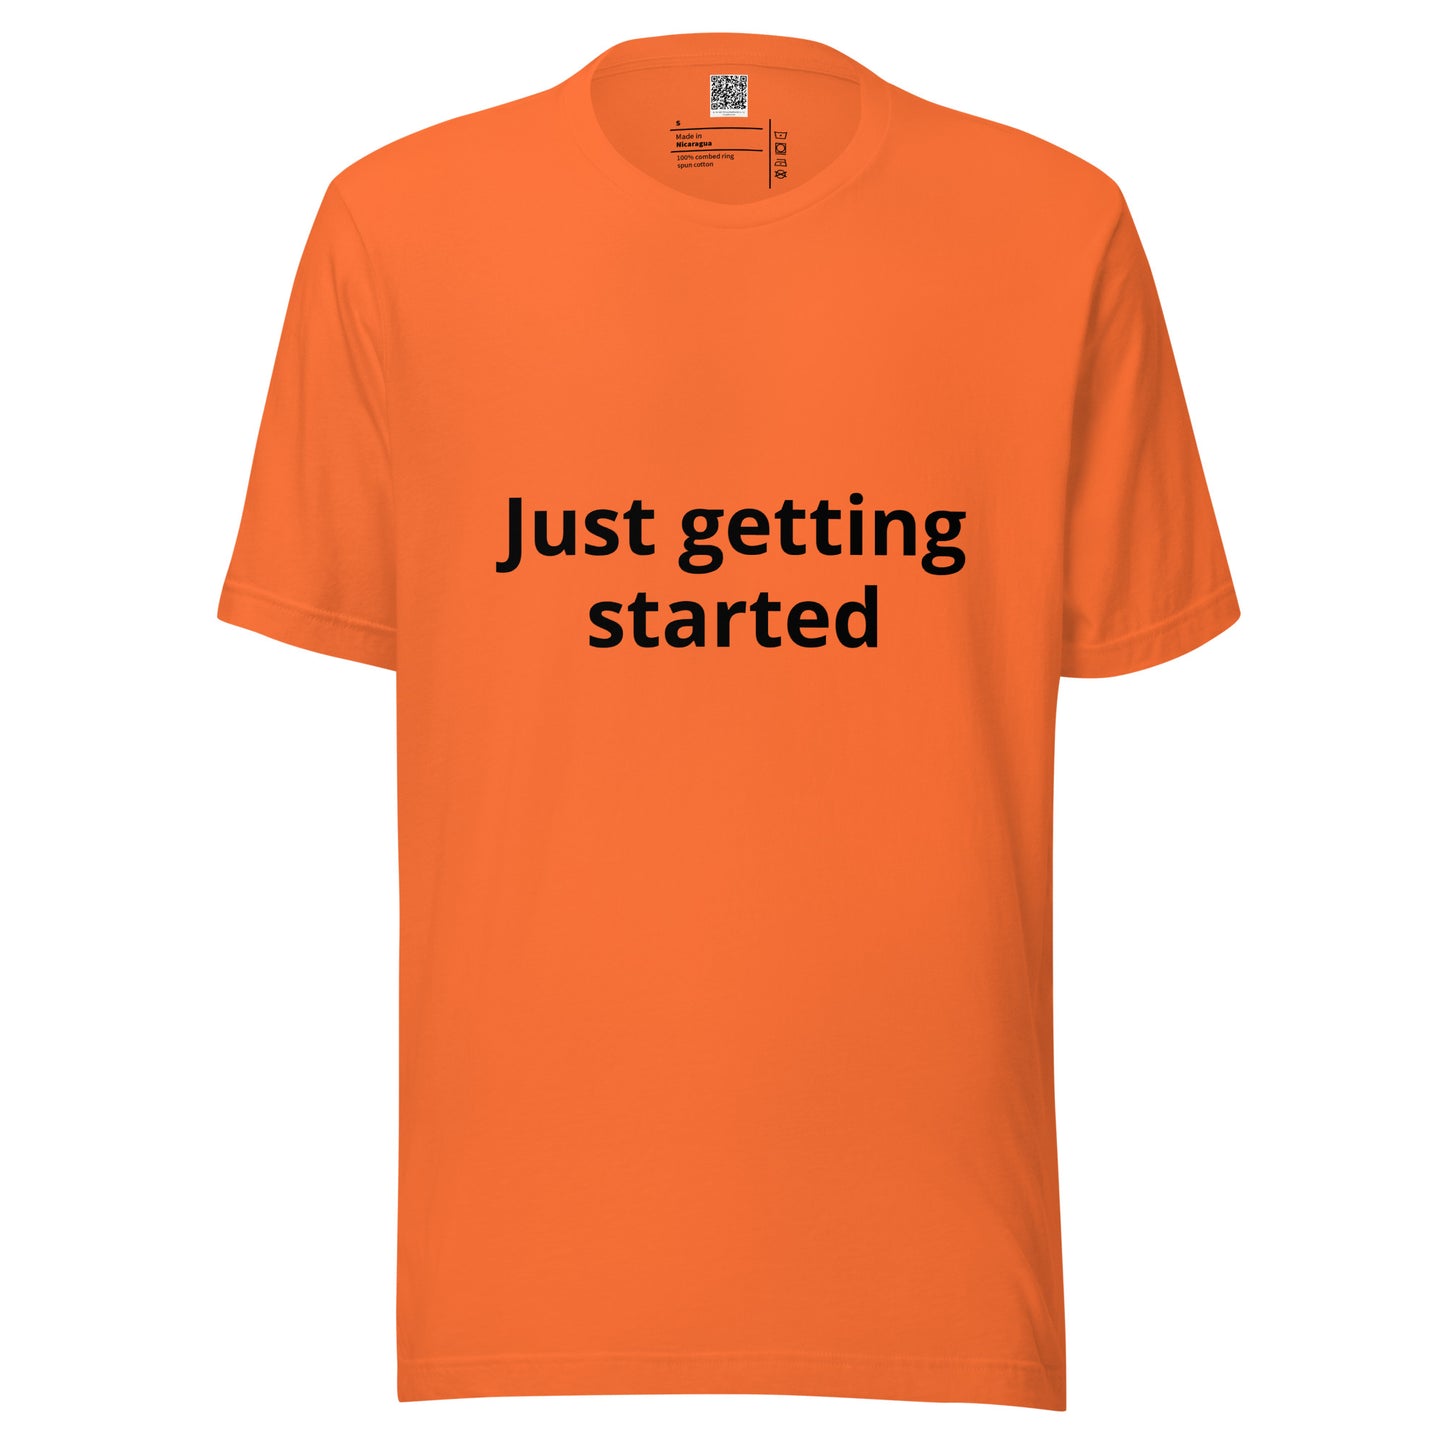 Unisex t-shirt - Just getting started